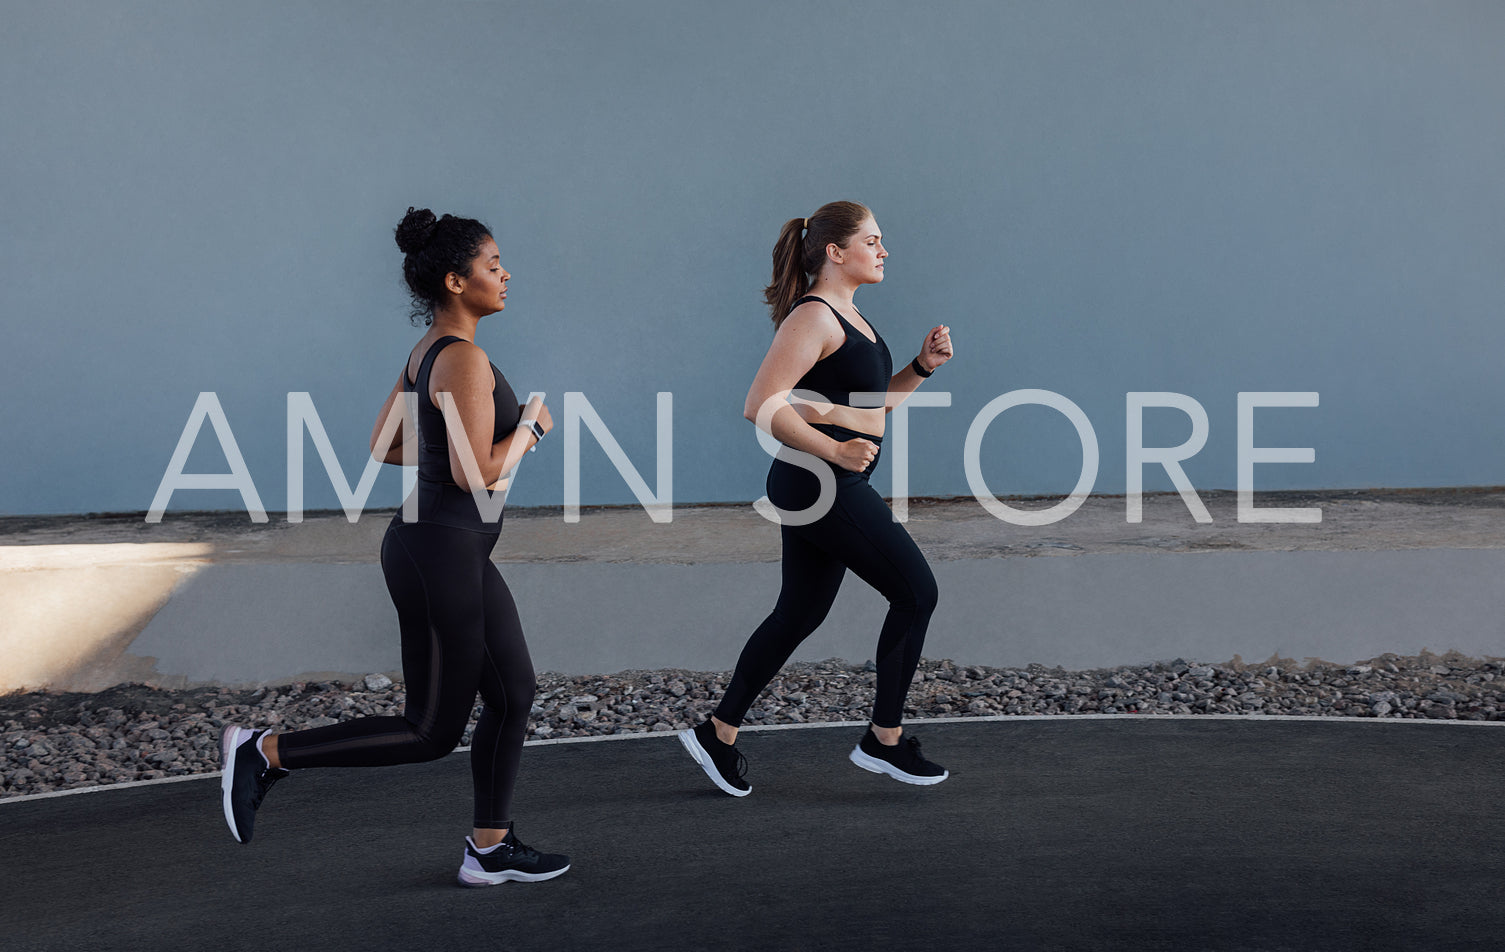 Two women with different body types running outdoors. Side view of two young females jogging at a grey wall.